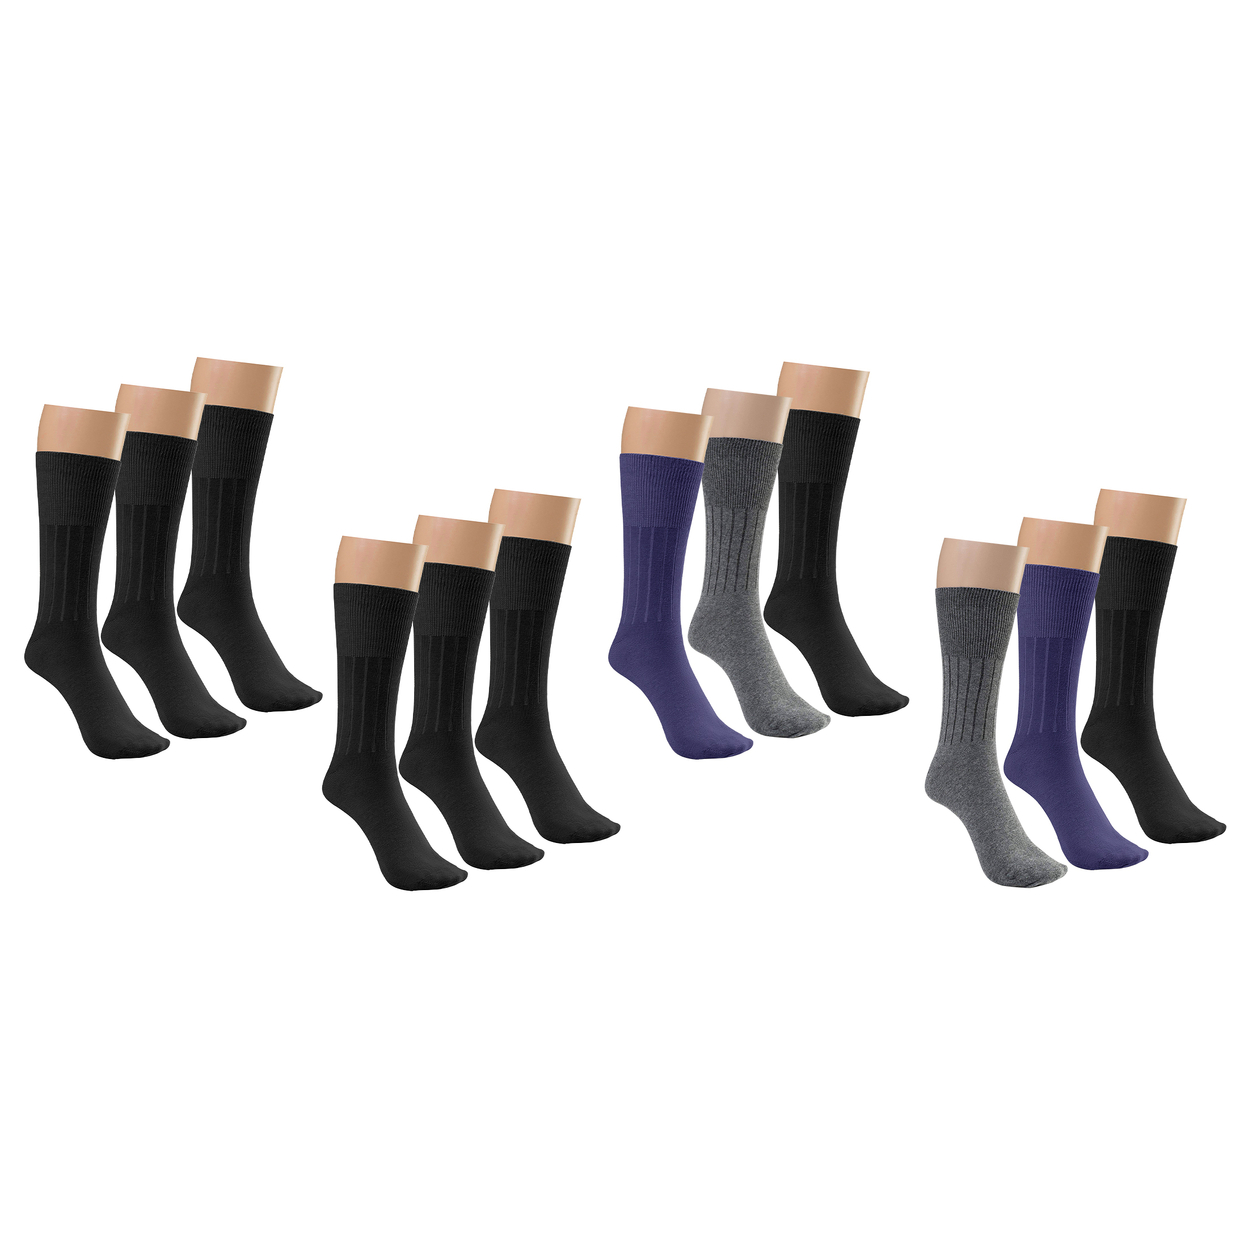 6-Pairs: Physician Approved Non-Binding Diabetic Circulatory Comfortable Moisture Wicking Dress Socks - Assorted